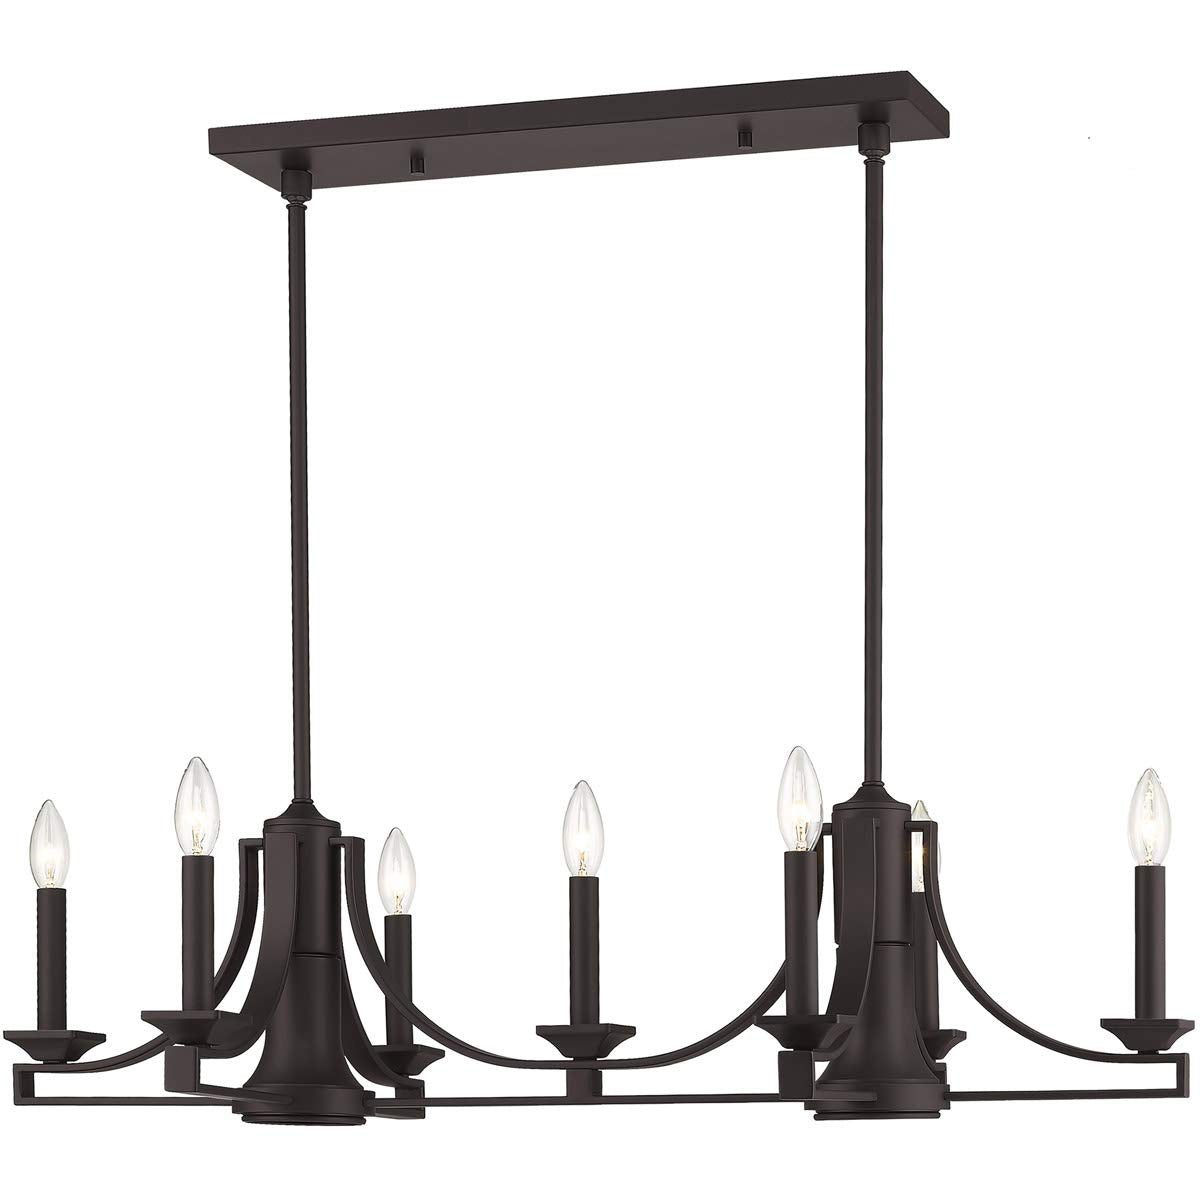 Livex Lighting 40057-07 Transitional Nine Light Linear Chandelier from Trumbull Collection in Bronze/Dark Finish, 36.00 inches, 48.50x36.00x18.25